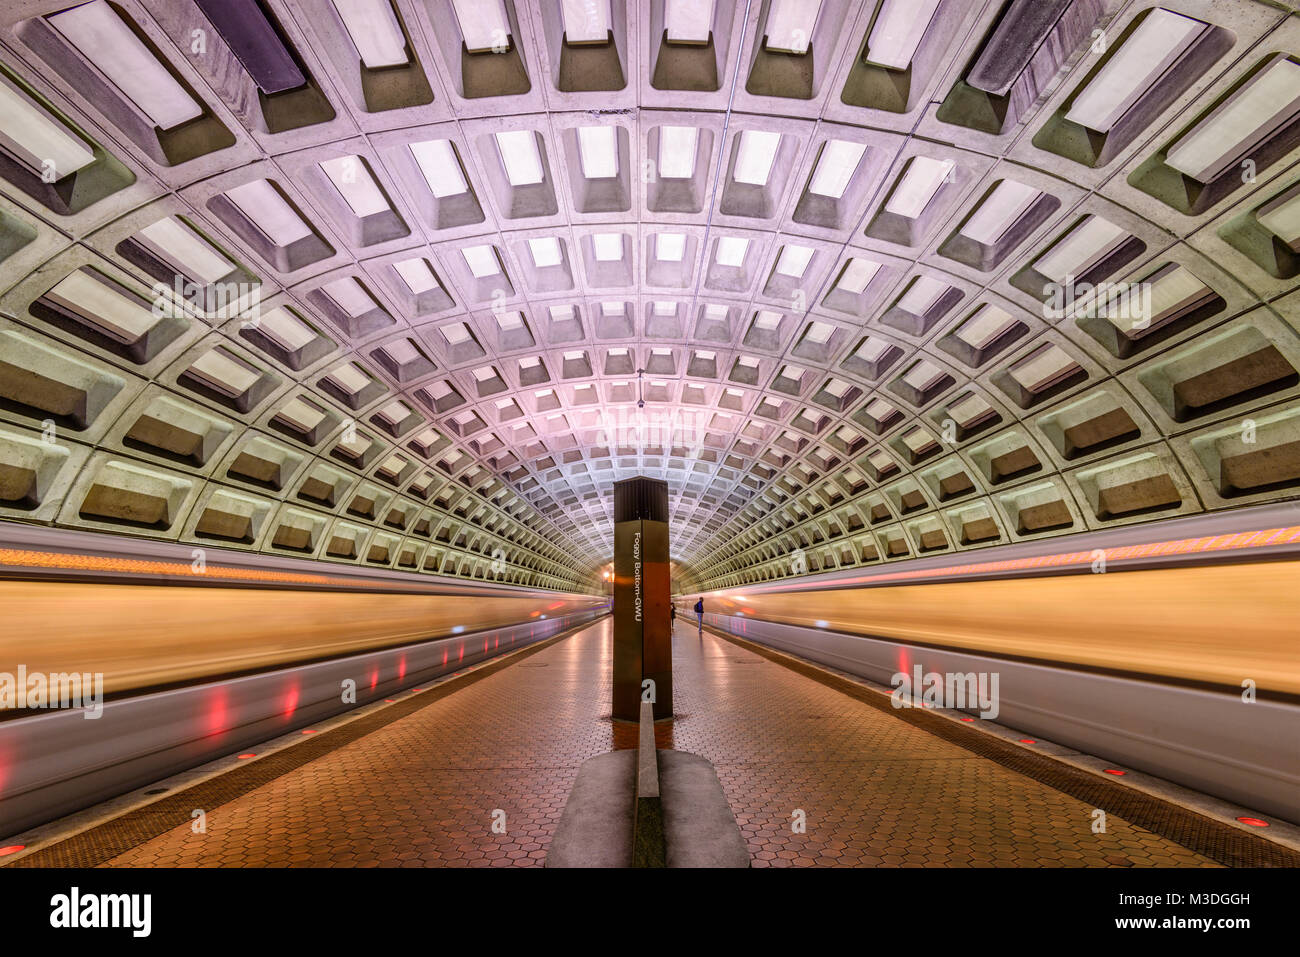 WASHINGTON, D.C. - APRIL 10, 2015: Trains and passengers in a Metro Station. Opened in 1976, the Washington Metro is now the second-busiest rapid tran Stock Photo